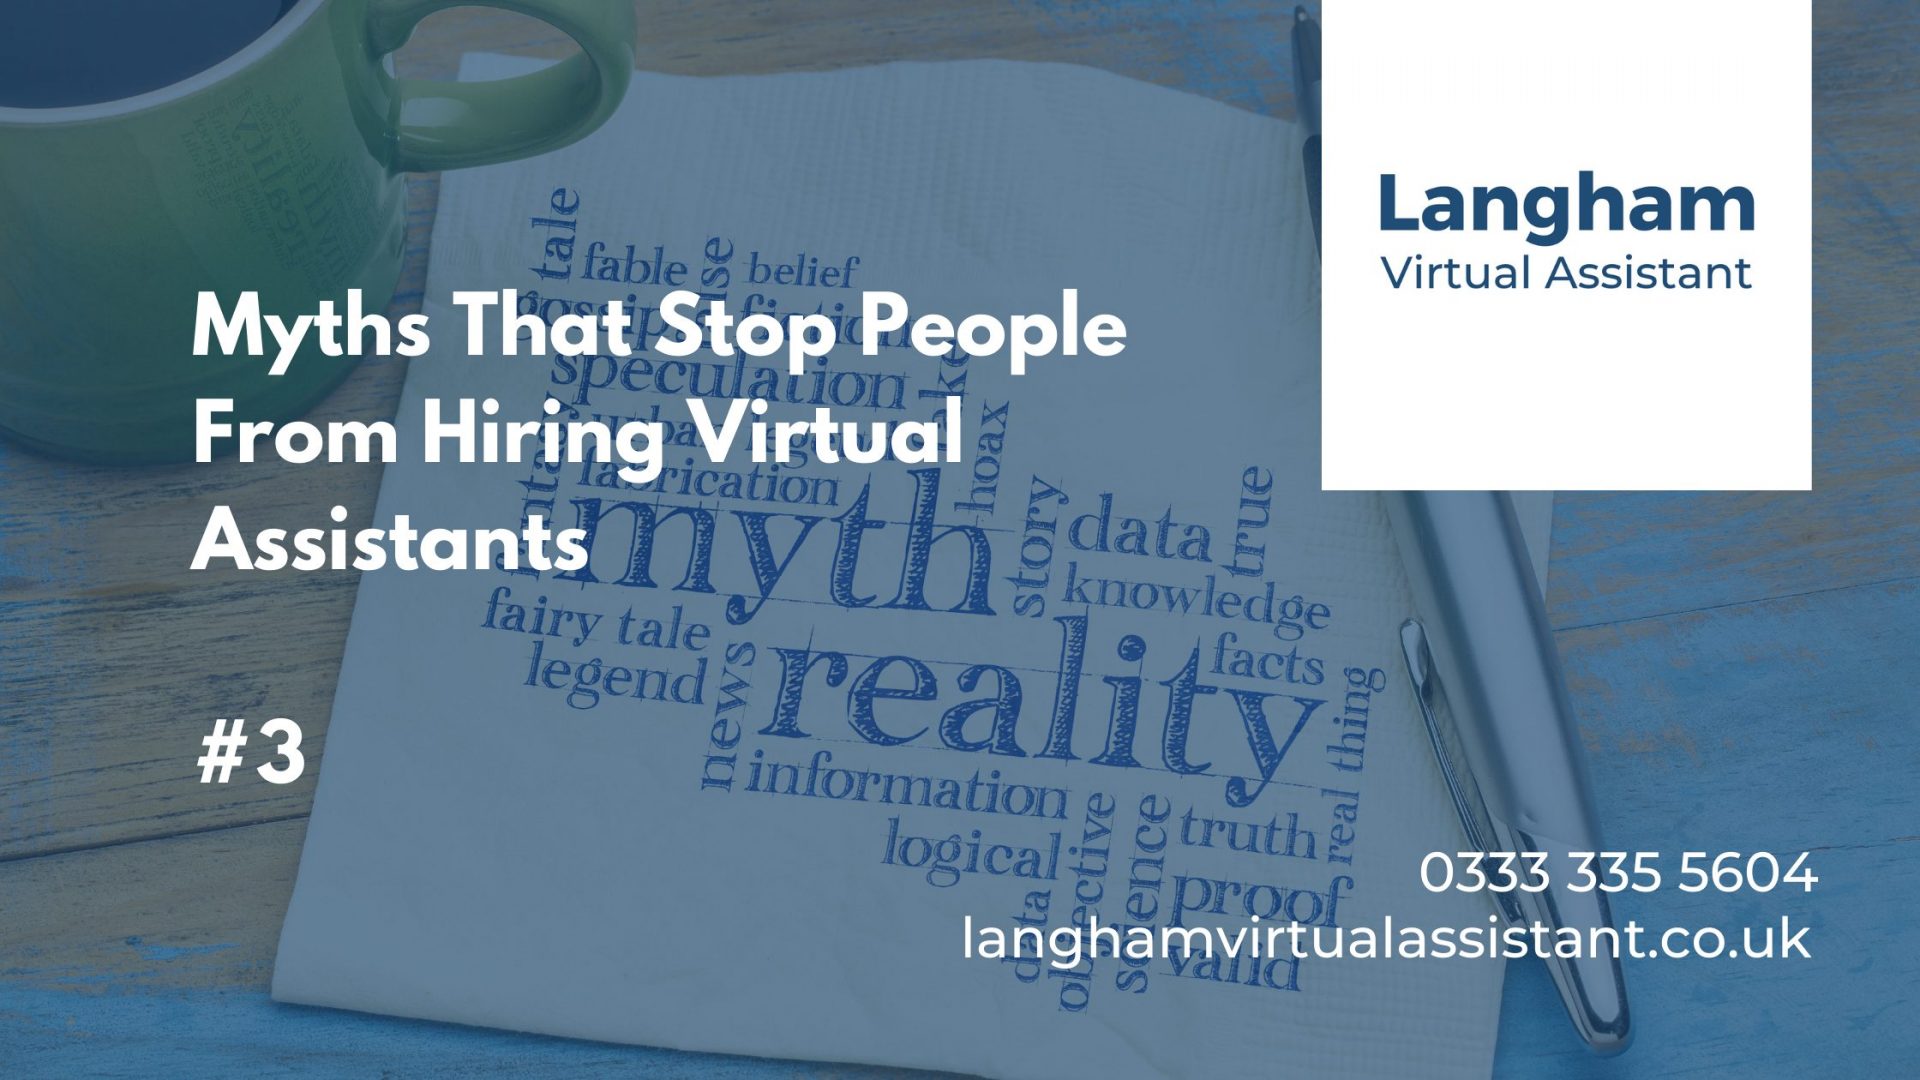 Myths-That-Stop-People-From-Hiring-Virtual-Assistants-WordPress-3-1